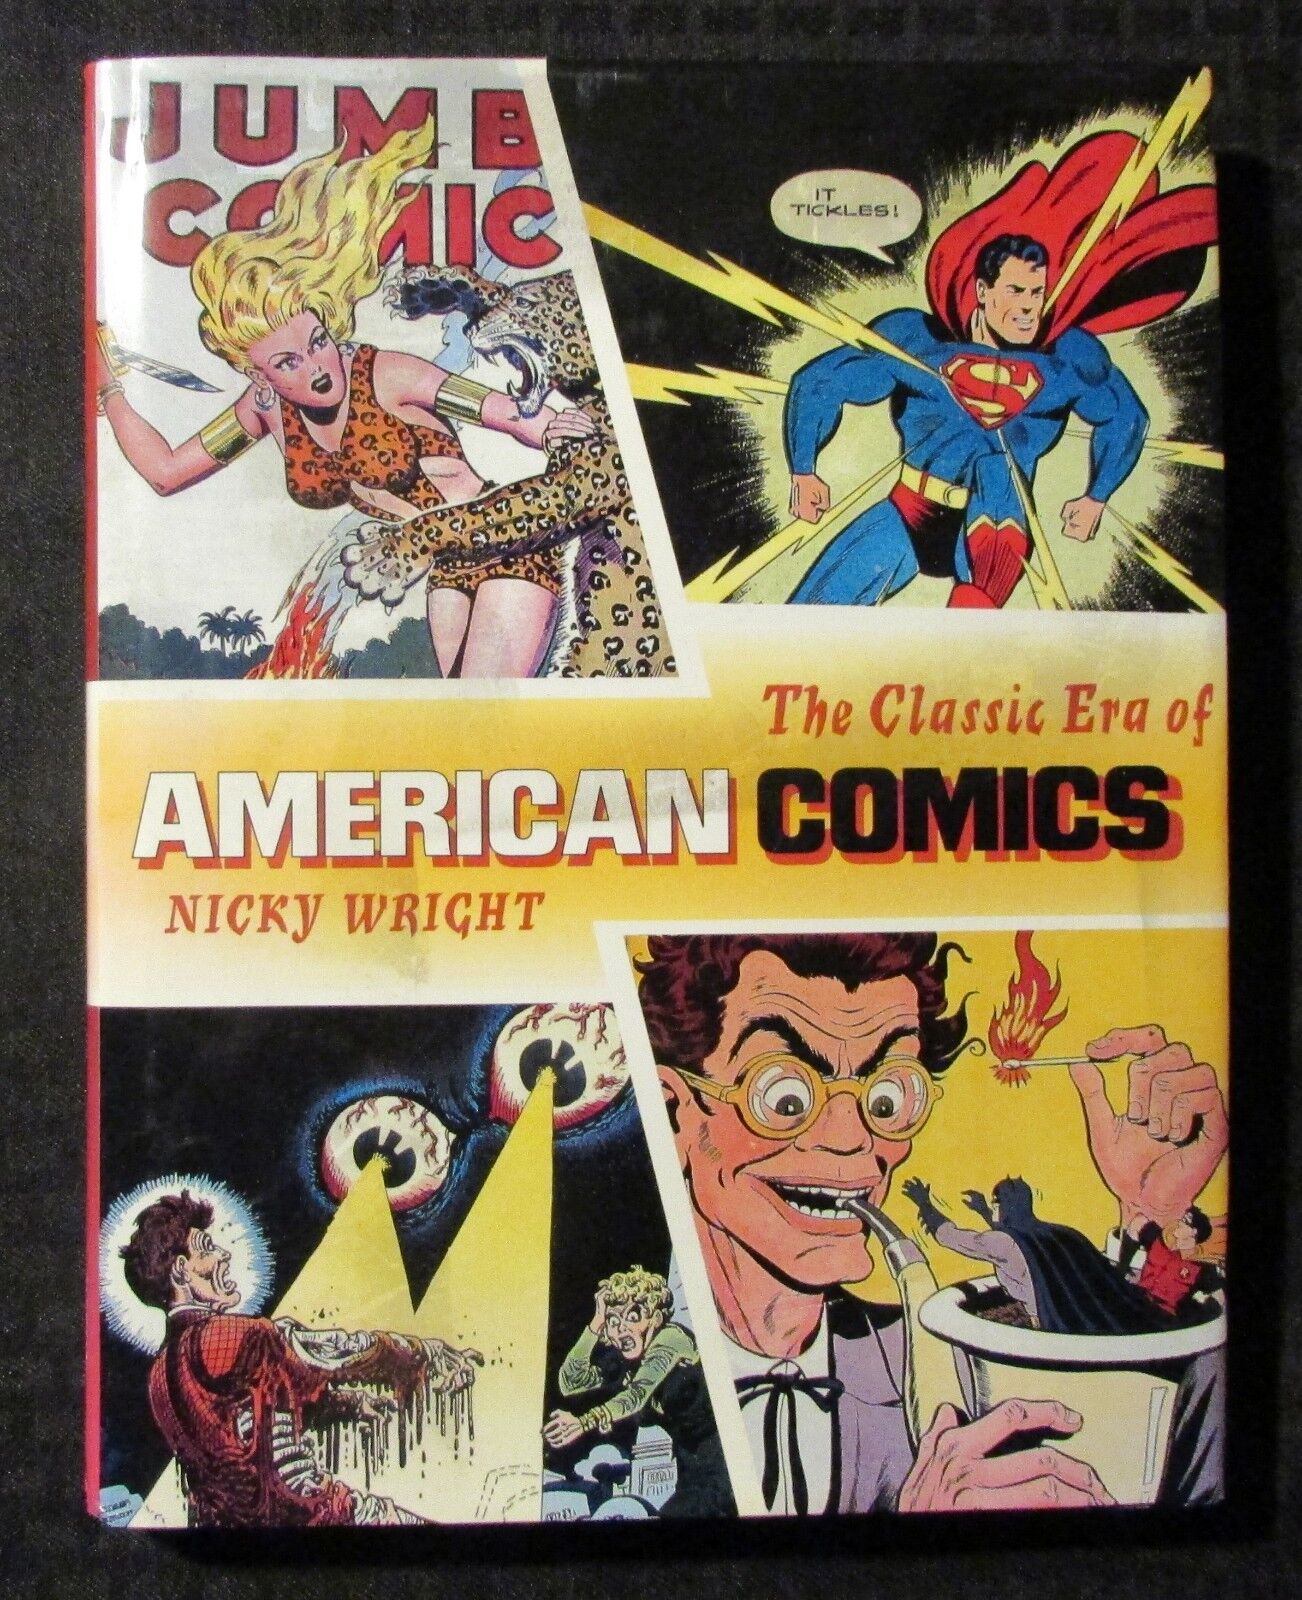 2000 The Classic Era of AMERICAN COMICS by Nicky Wright  HC/DJ VF+/FVF 1st Prion